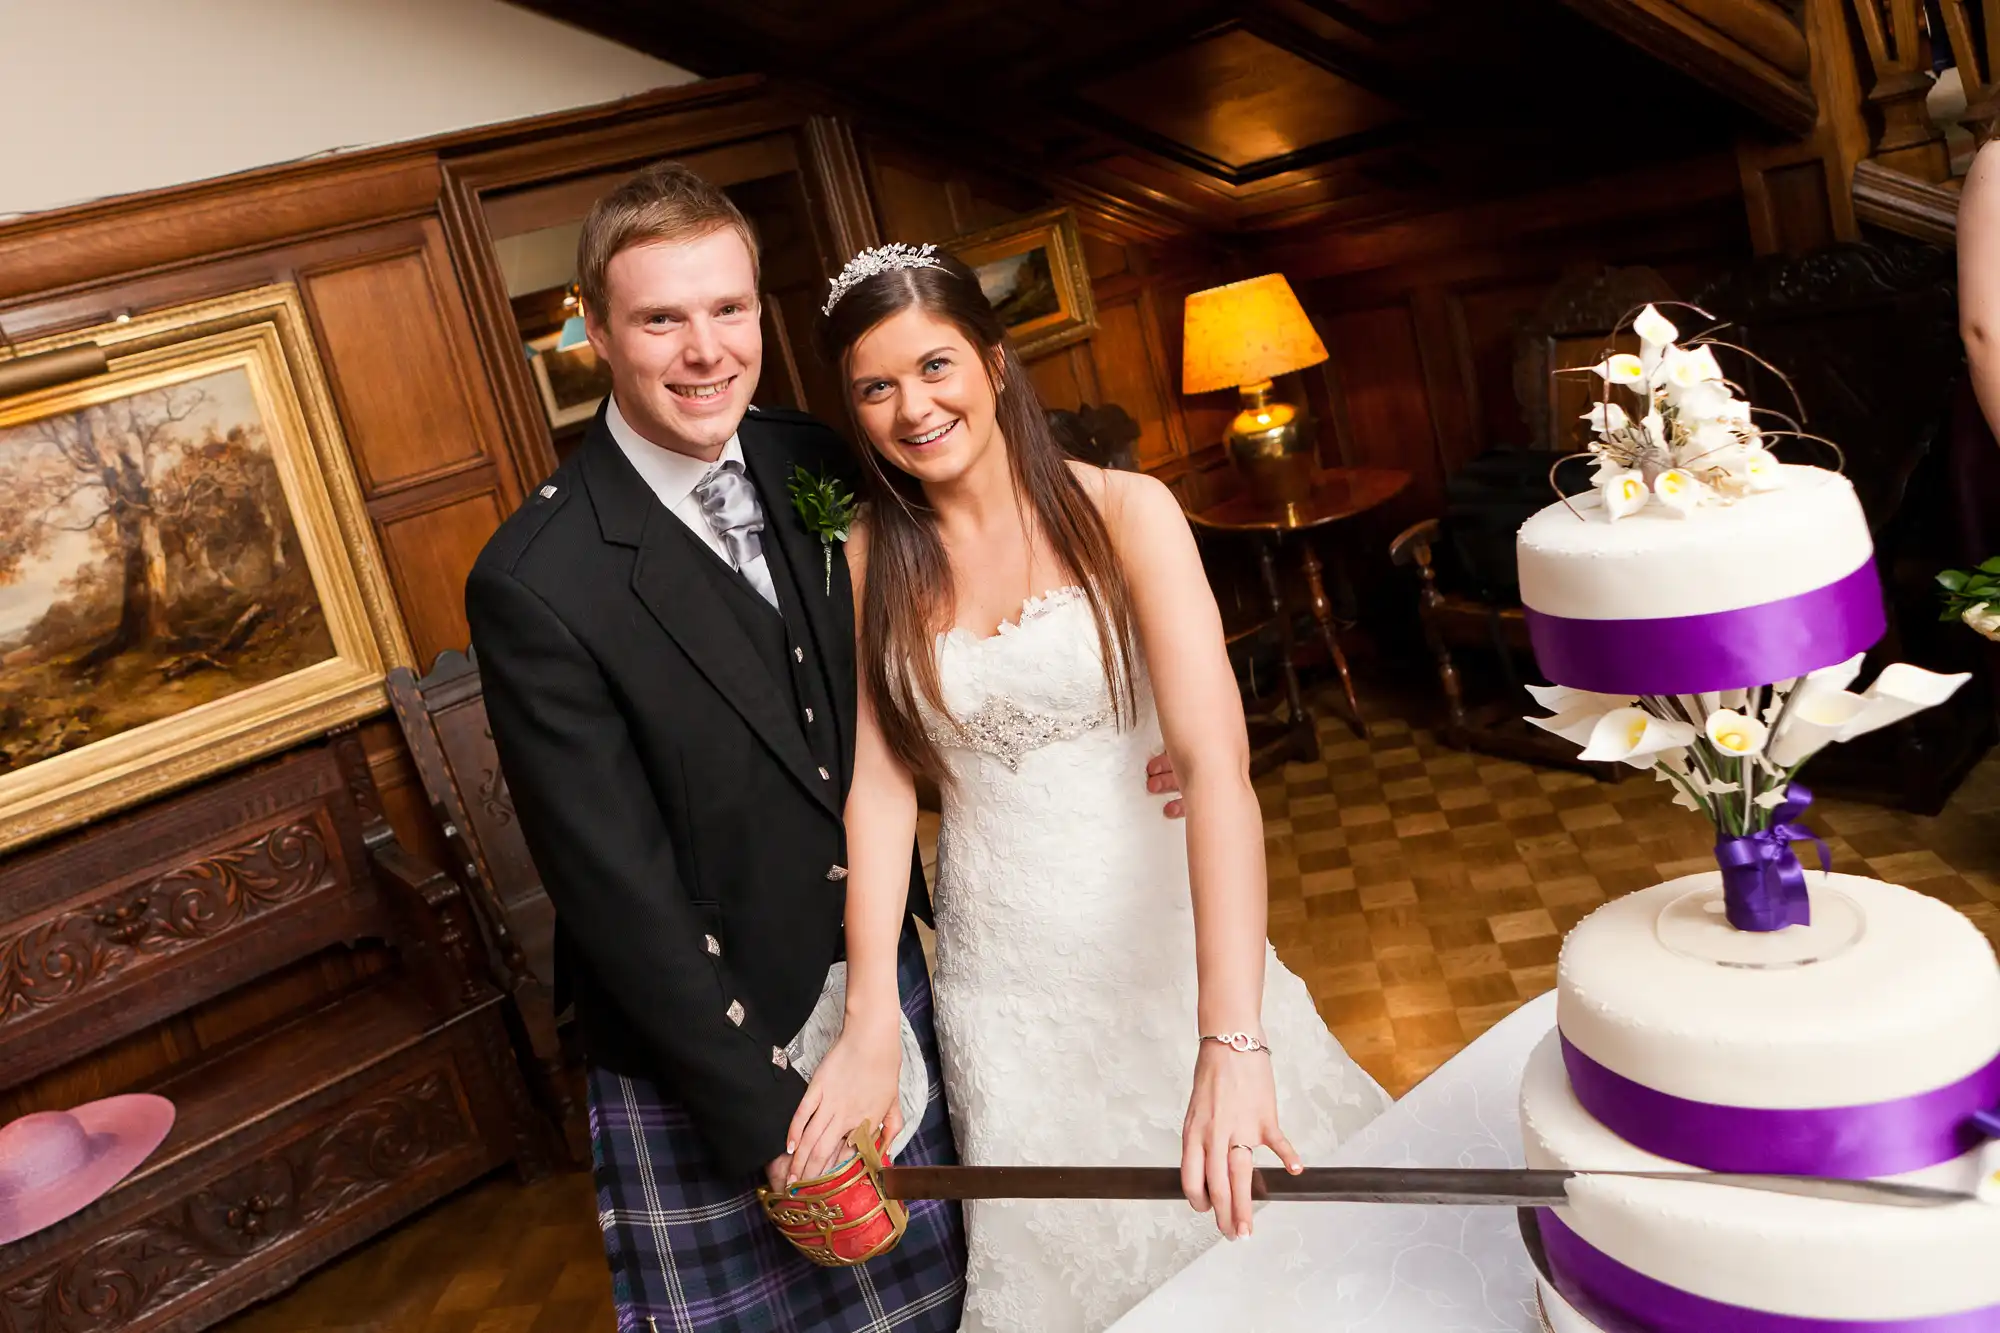 A bride and groom in wedding attire, smiling and cutting a white and purple tiered cake in a warmly lit room with wood paneling.